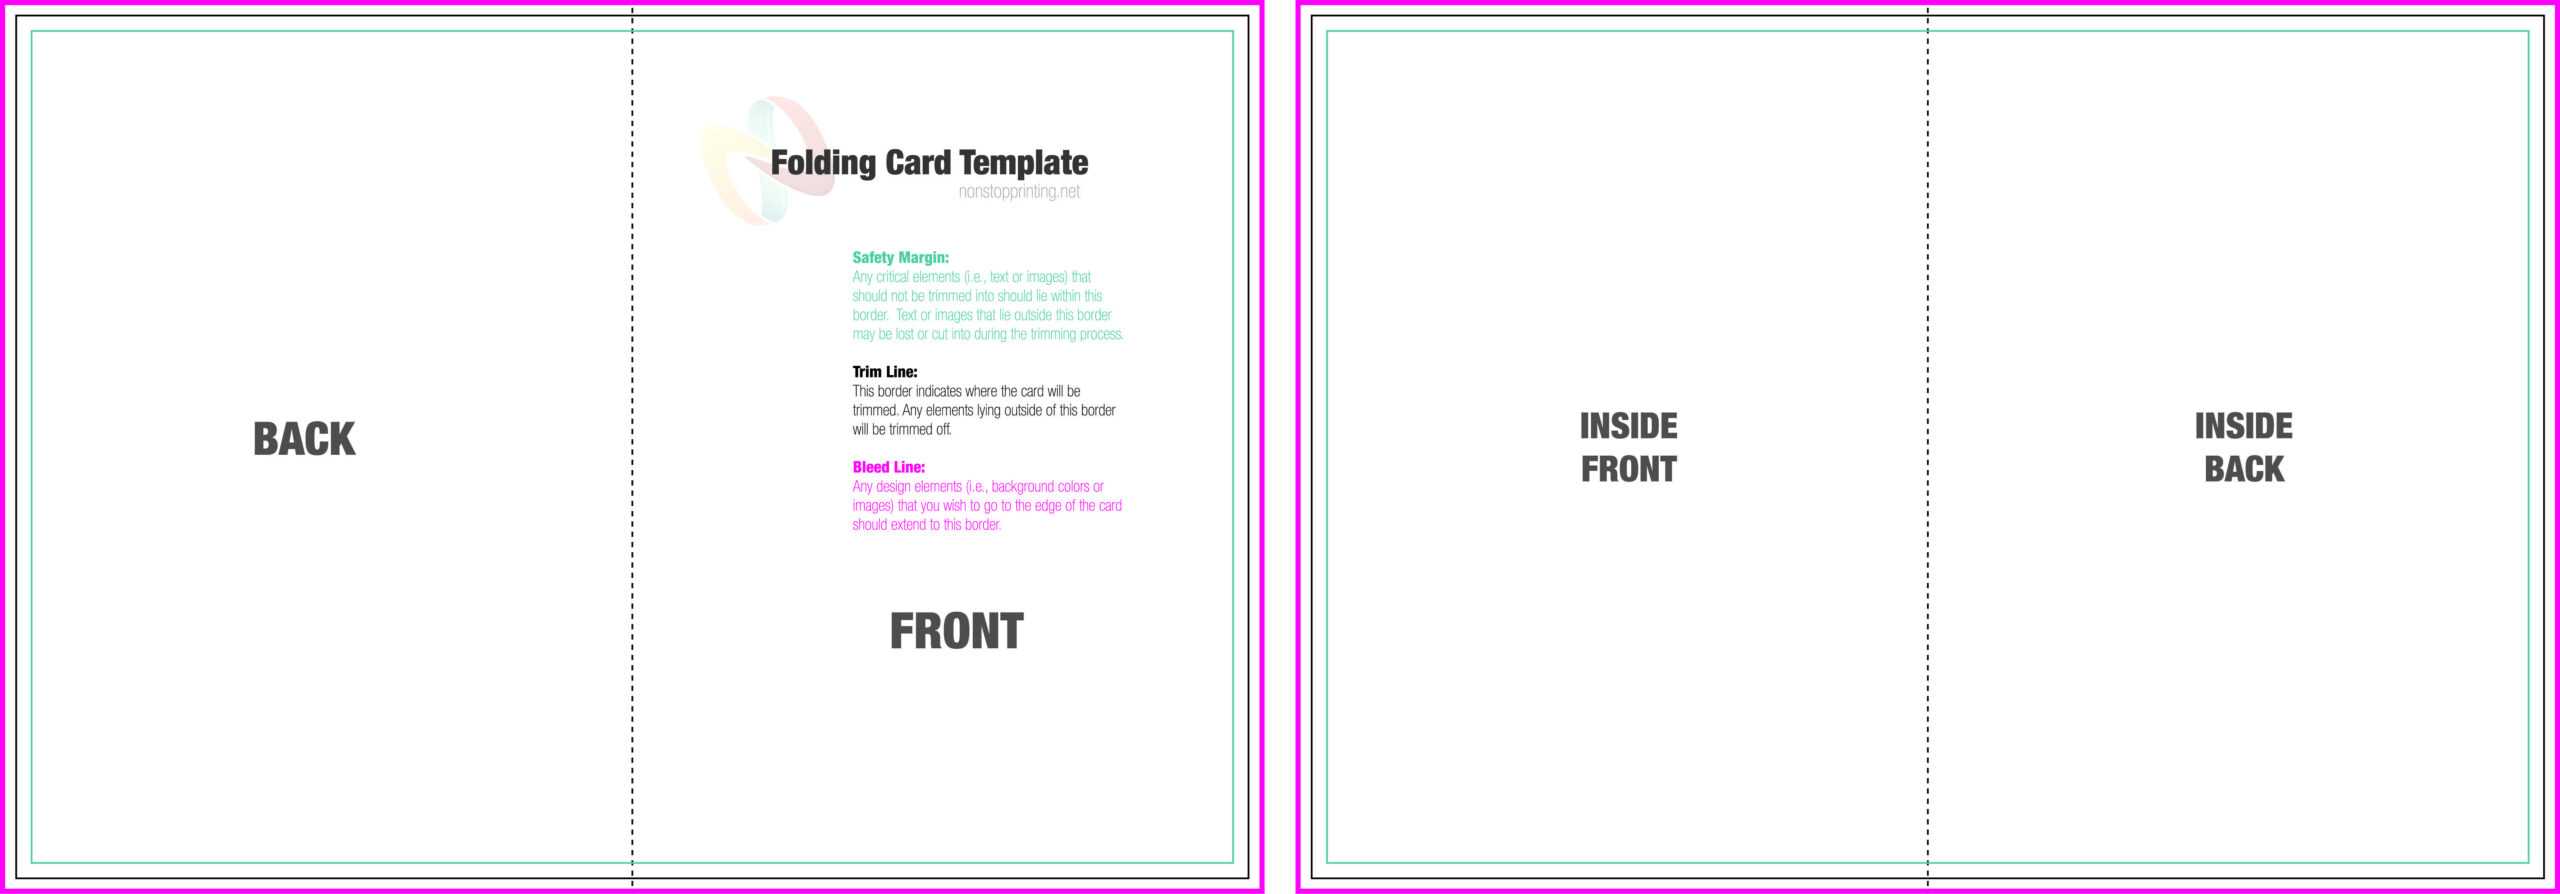 39 Online Folding Card Template For Word Now With Folding With Regard To Foldable Card Template Word